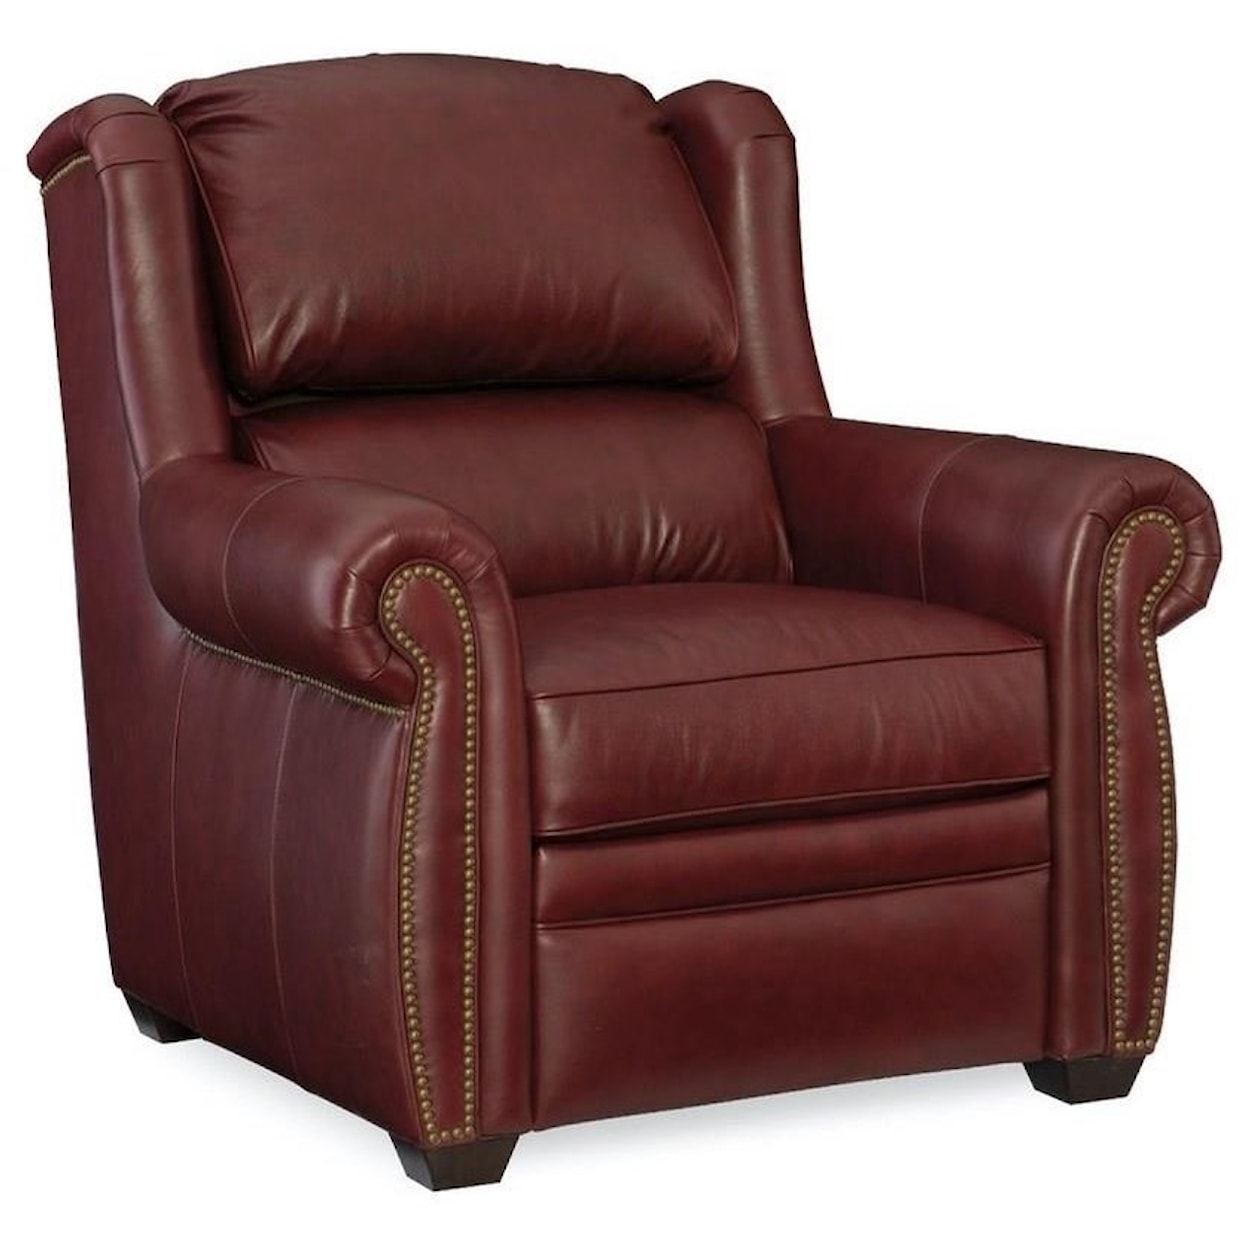 Bradington Young Discovery Power Recliner